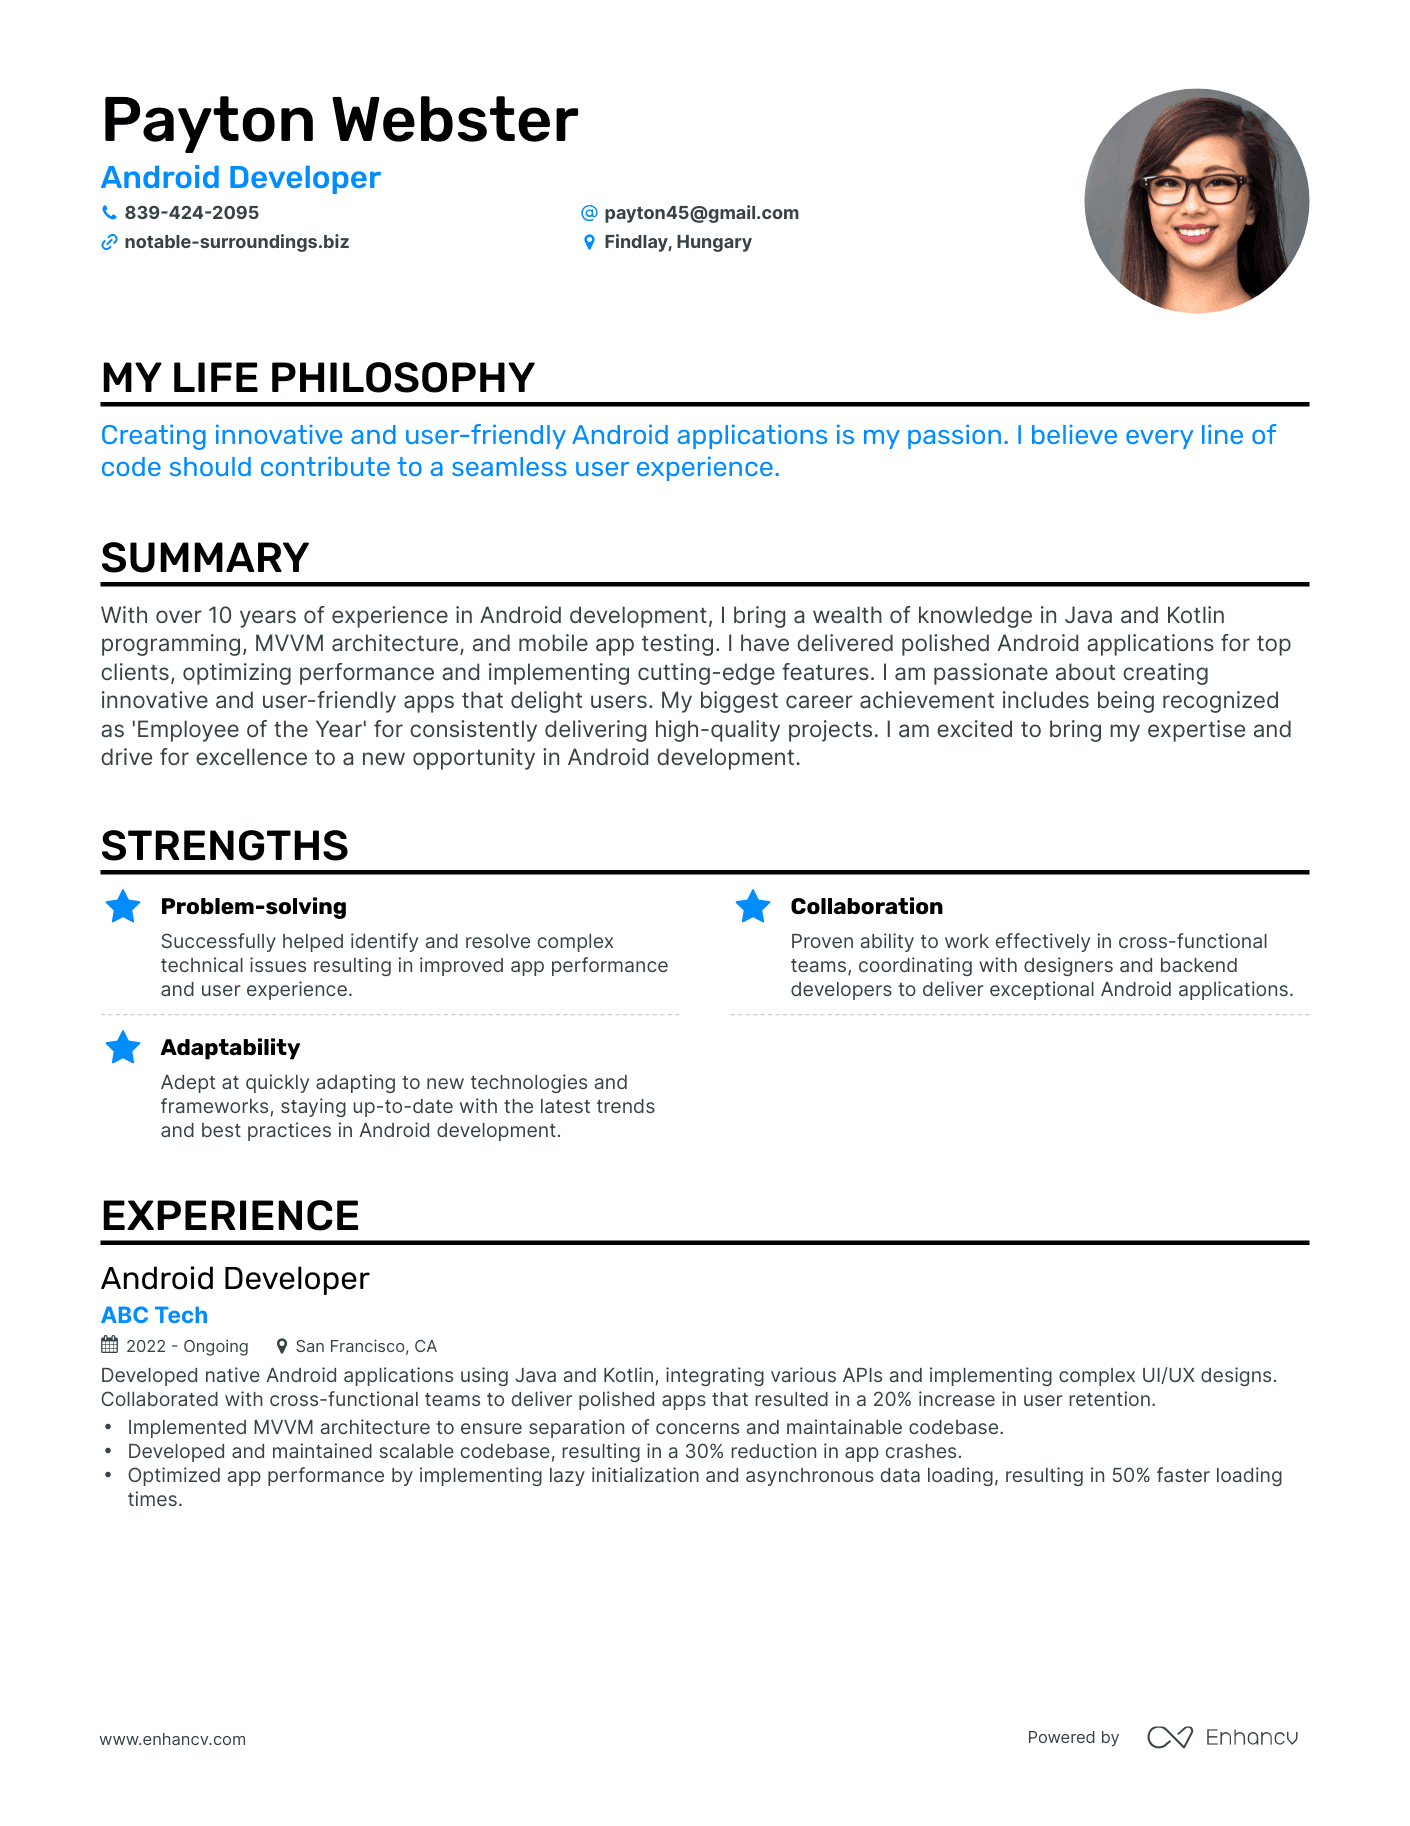 Creative Android Developer Resume Example